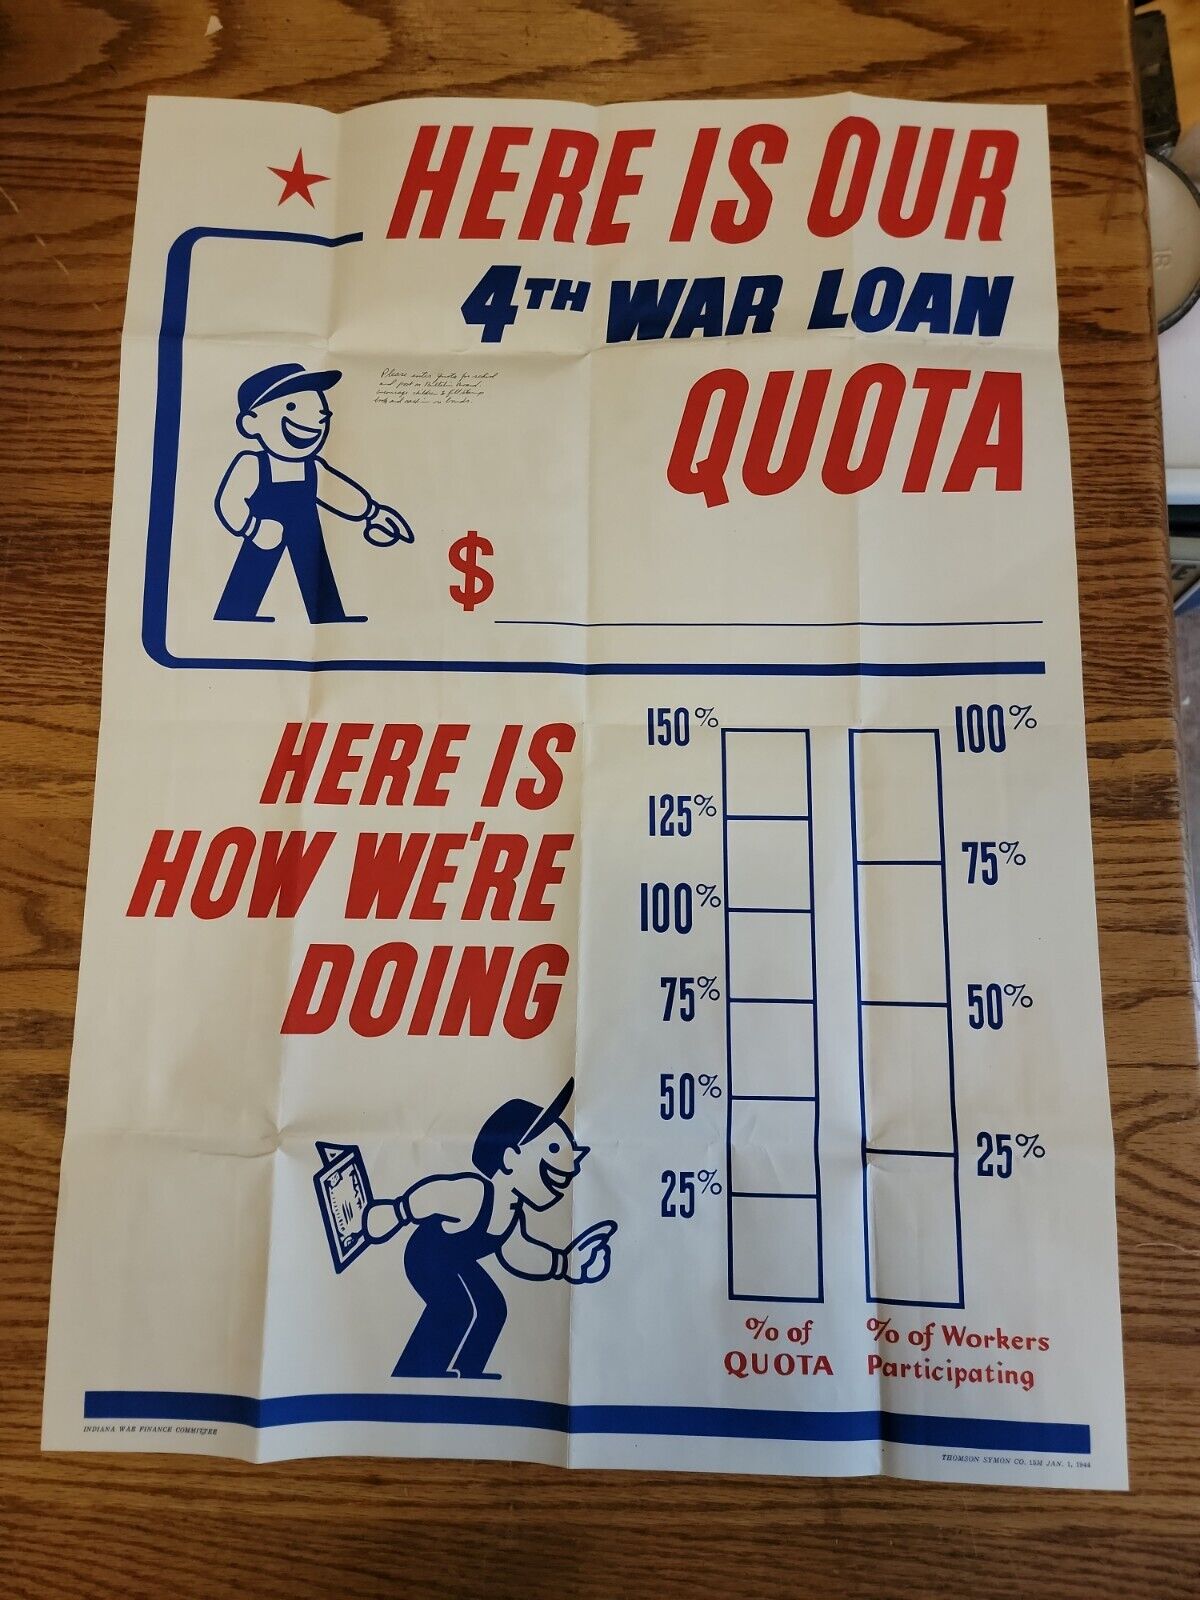 1944 WWII INDIANA WAR FINANCE 4TH LOAN QUOTA POSTER AD RARE VTG WORKERS LABOR